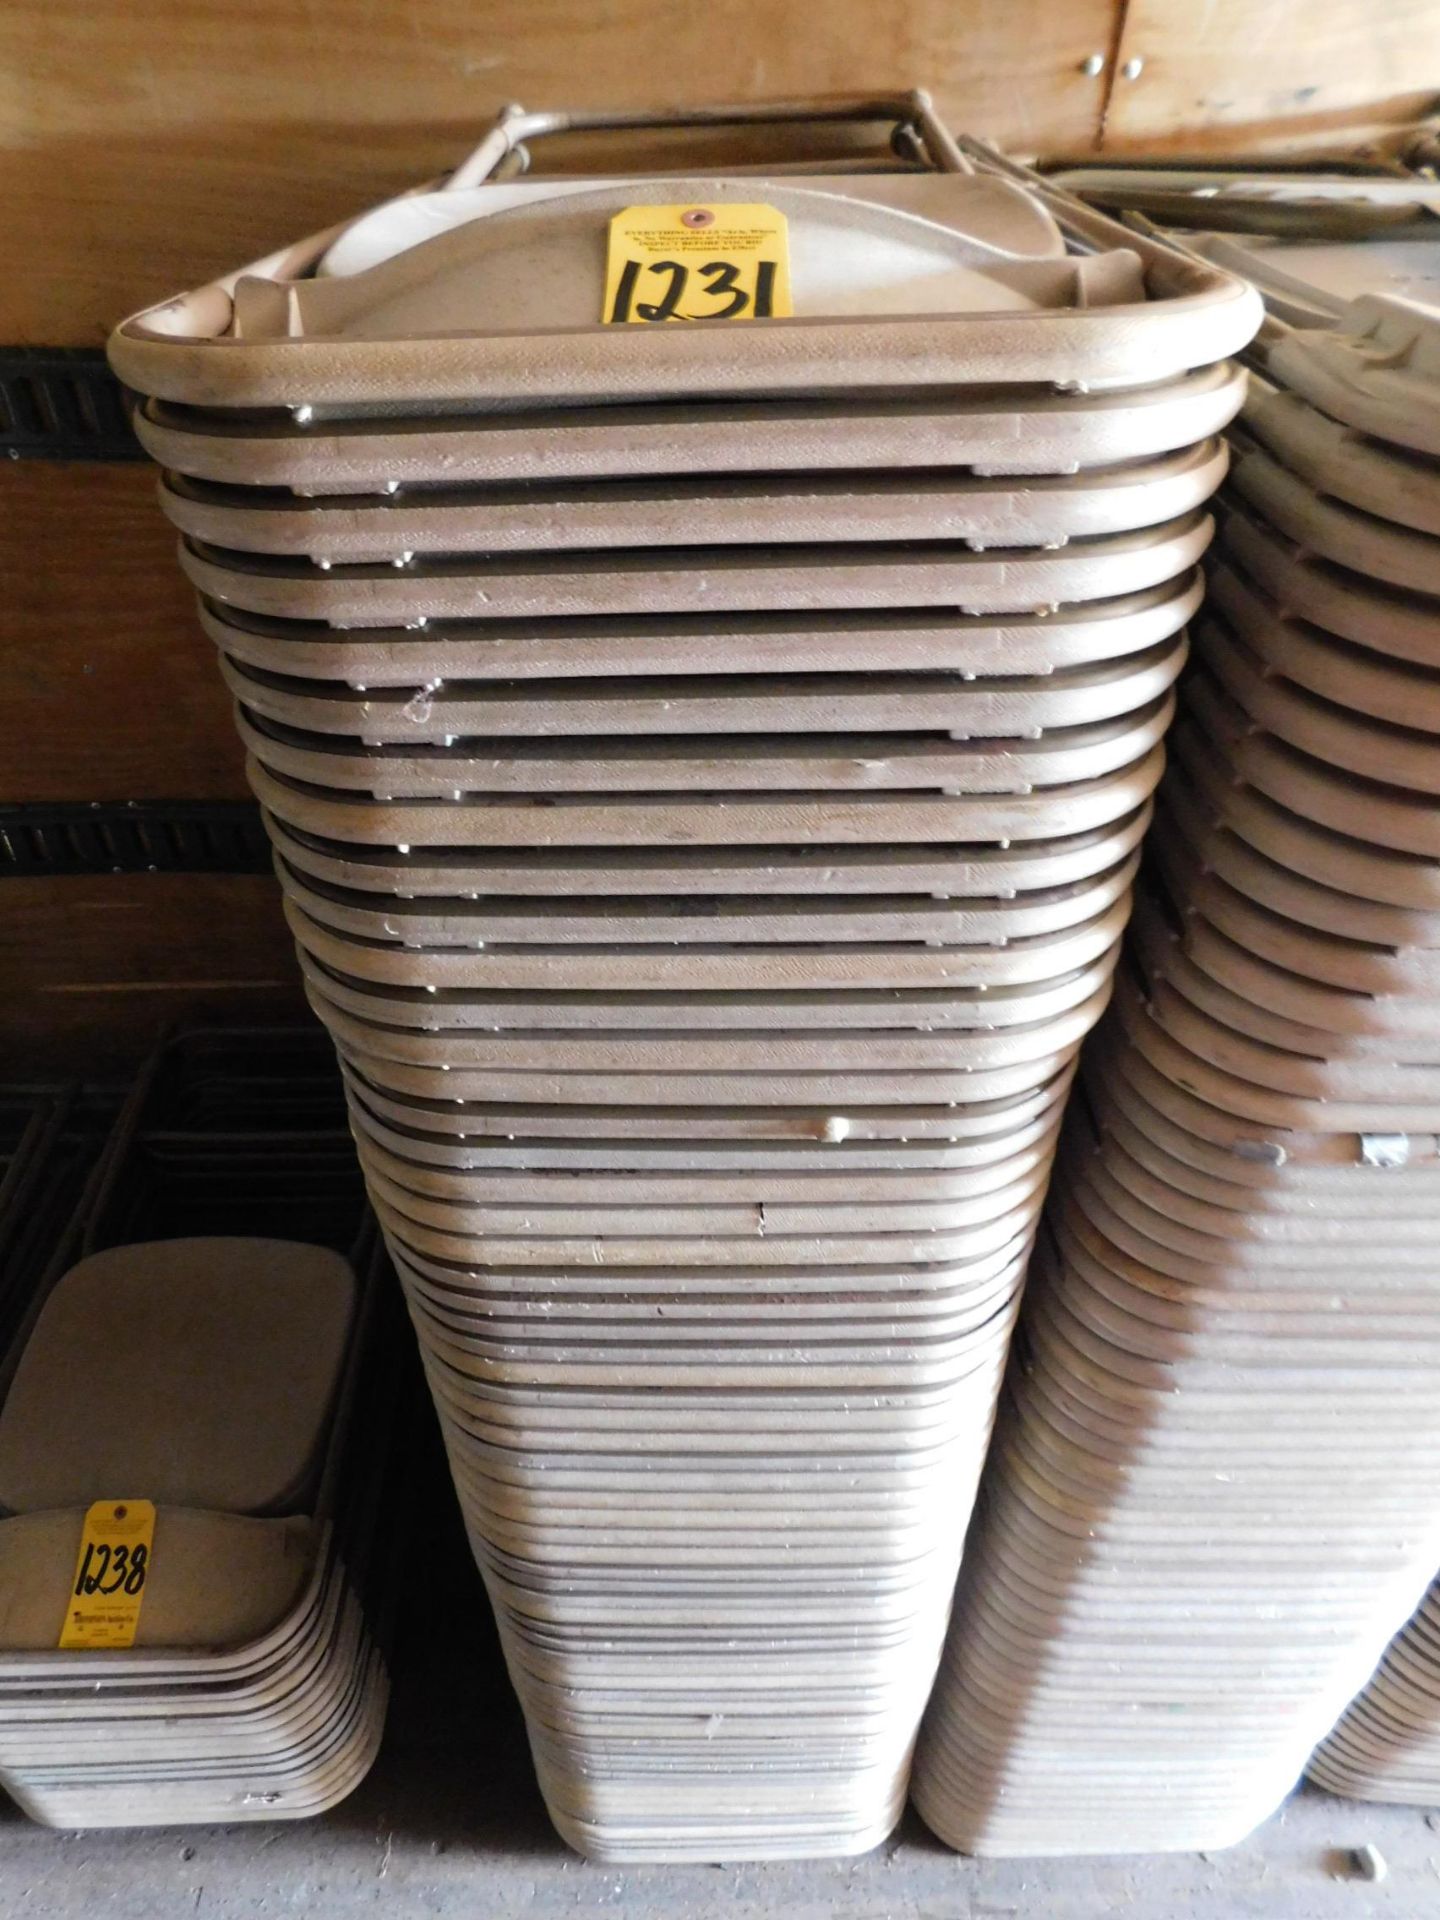 60 Biege/Brown Plastic Folding Chairs - Image 2 of 2